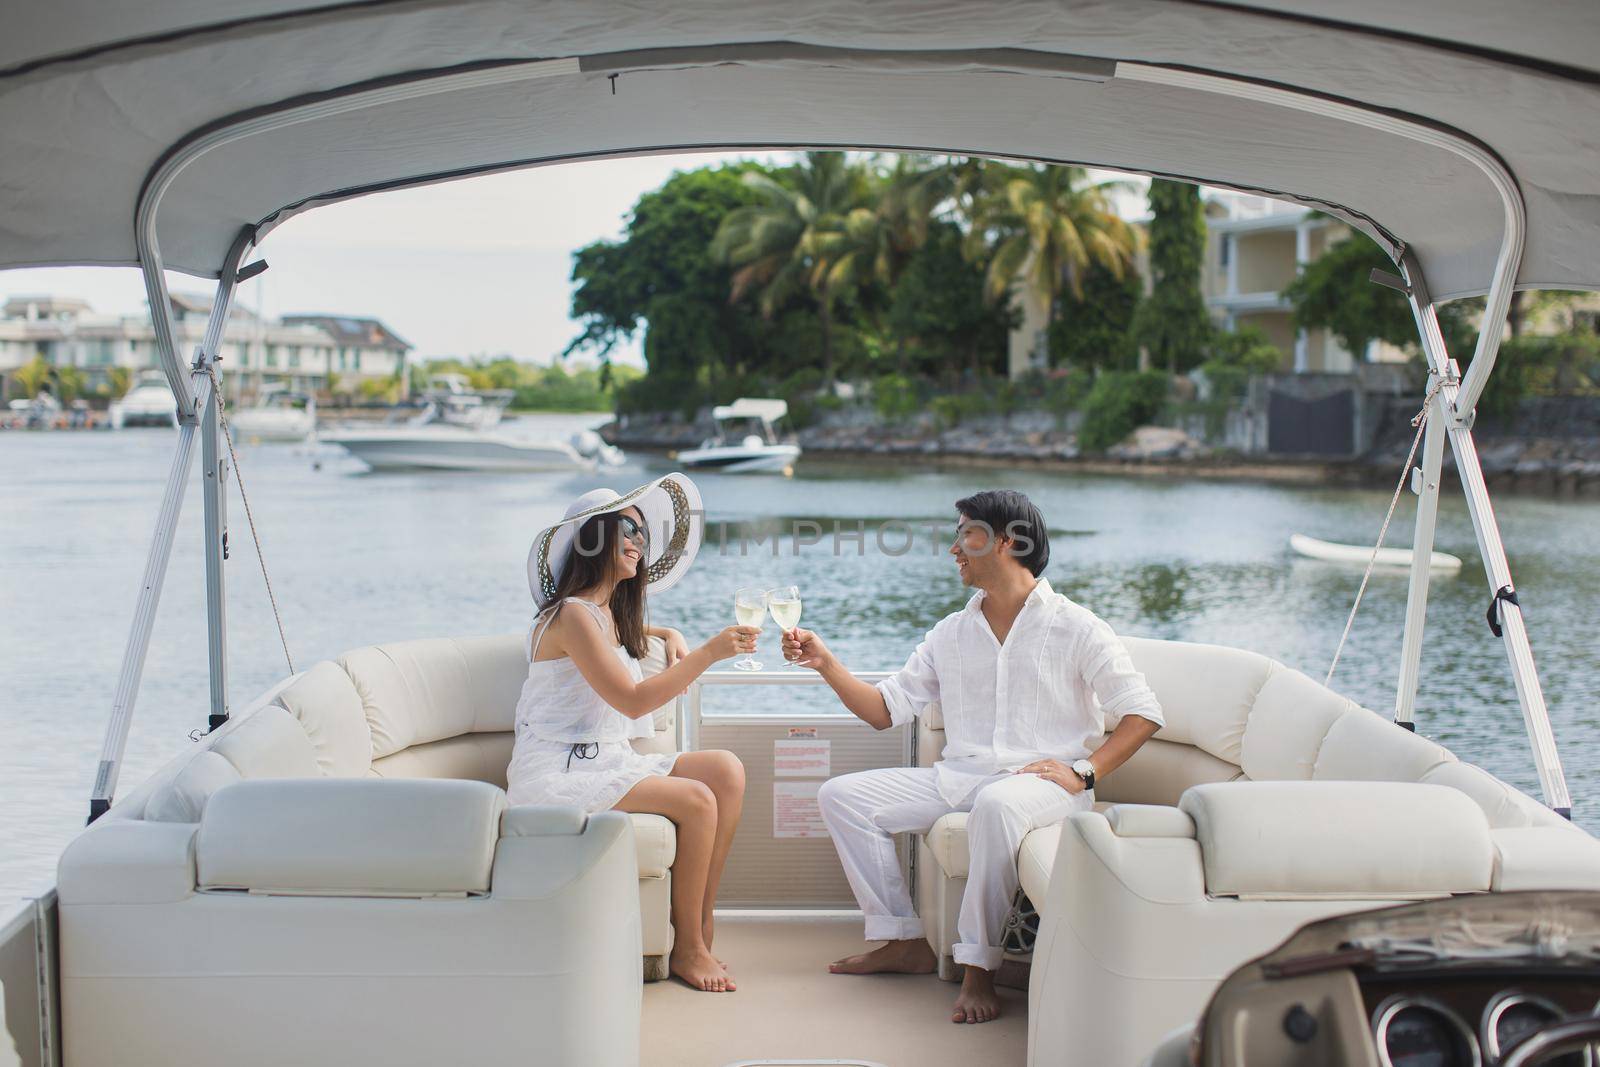 Smiling young couple holding glasses with champagne and looking at each other while sitting on the board of yacht